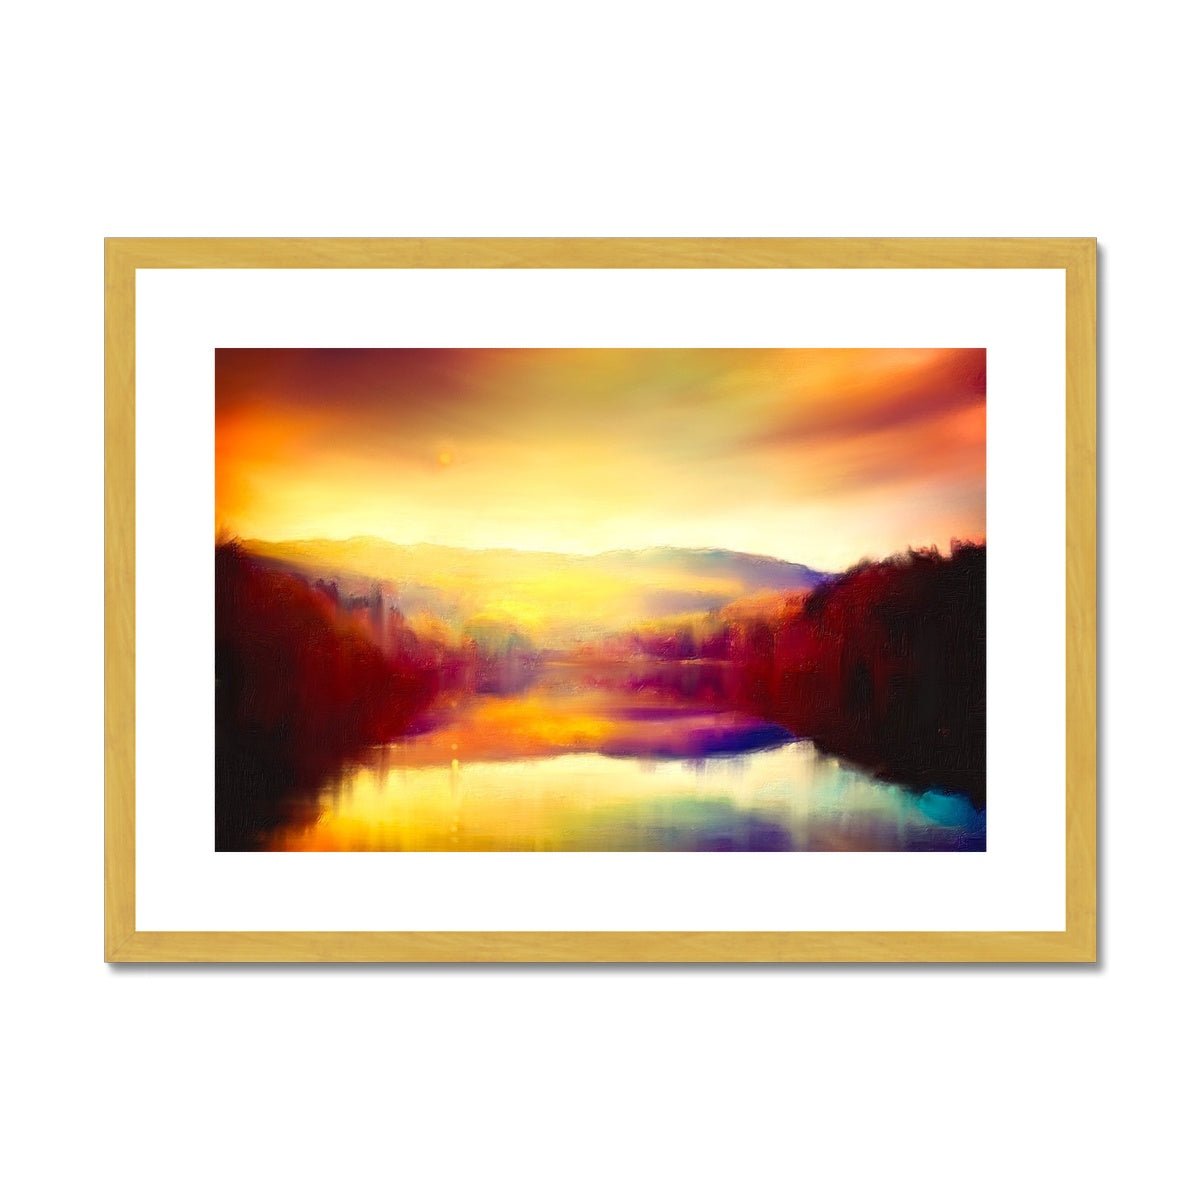 Loch Faskally Dusk Painting | Antique Framed & Mounted Prints From Scotland-Antique Framed & Mounted Prints-Scottish Lochs & Mountains Art Gallery-A2 Landscape-Gold Frame-Paintings, Prints, Homeware, Art Gifts From Scotland By Scottish Artist Kevin Hunter